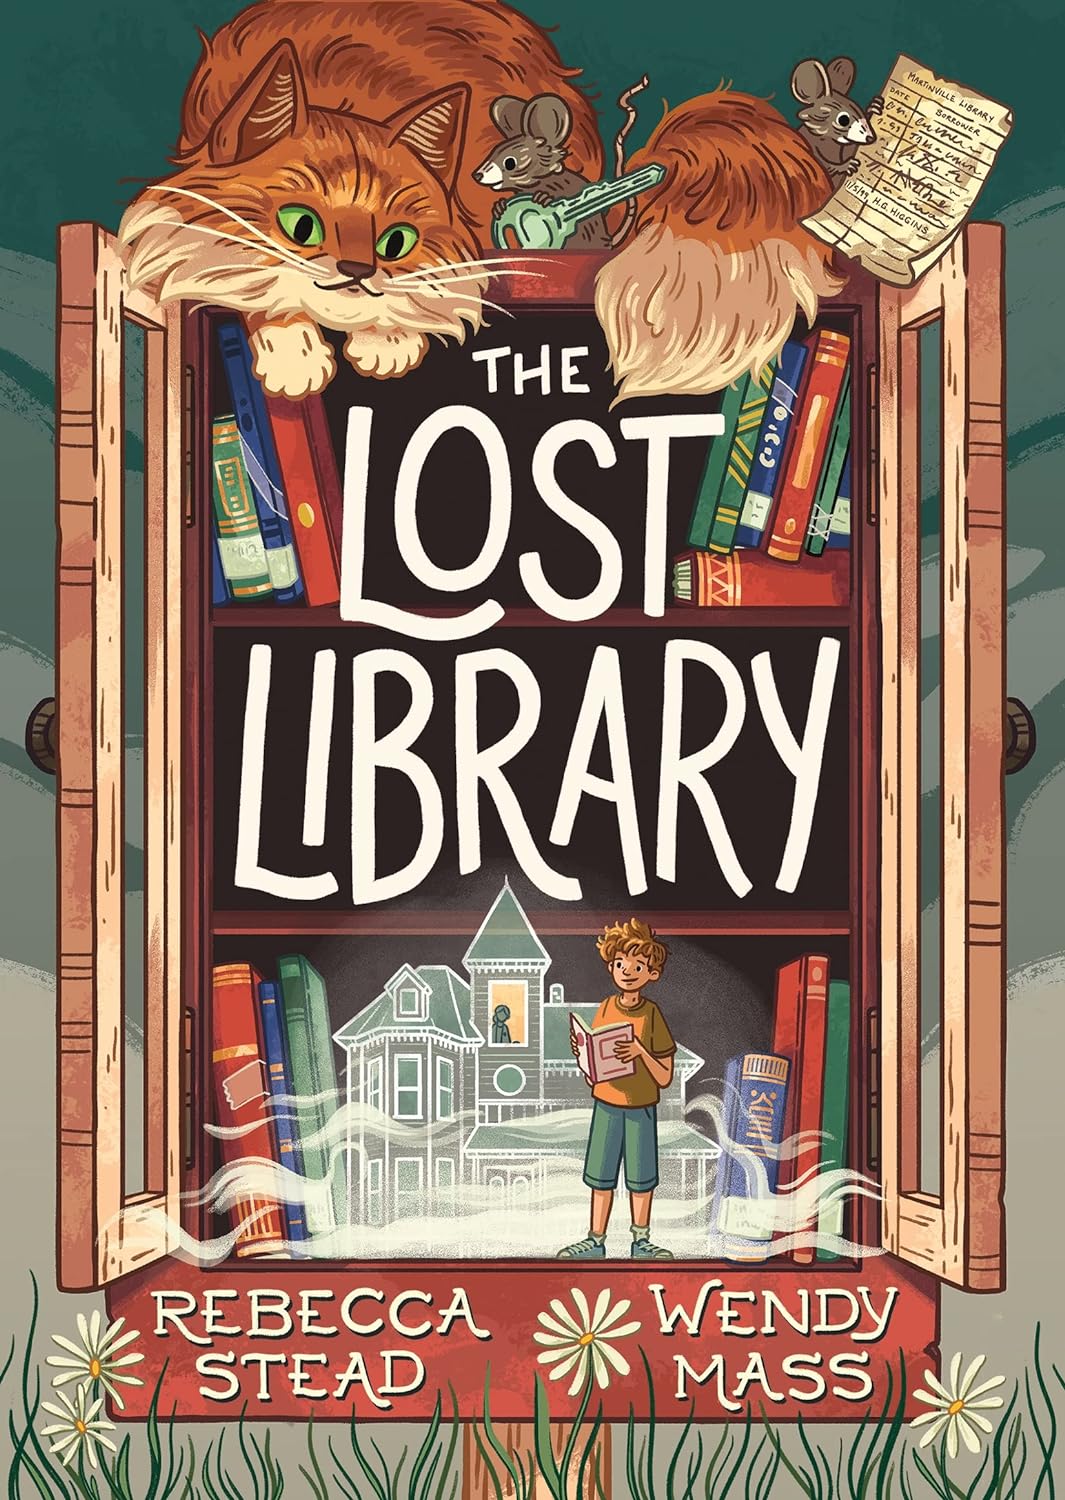 "The Lost  Library"